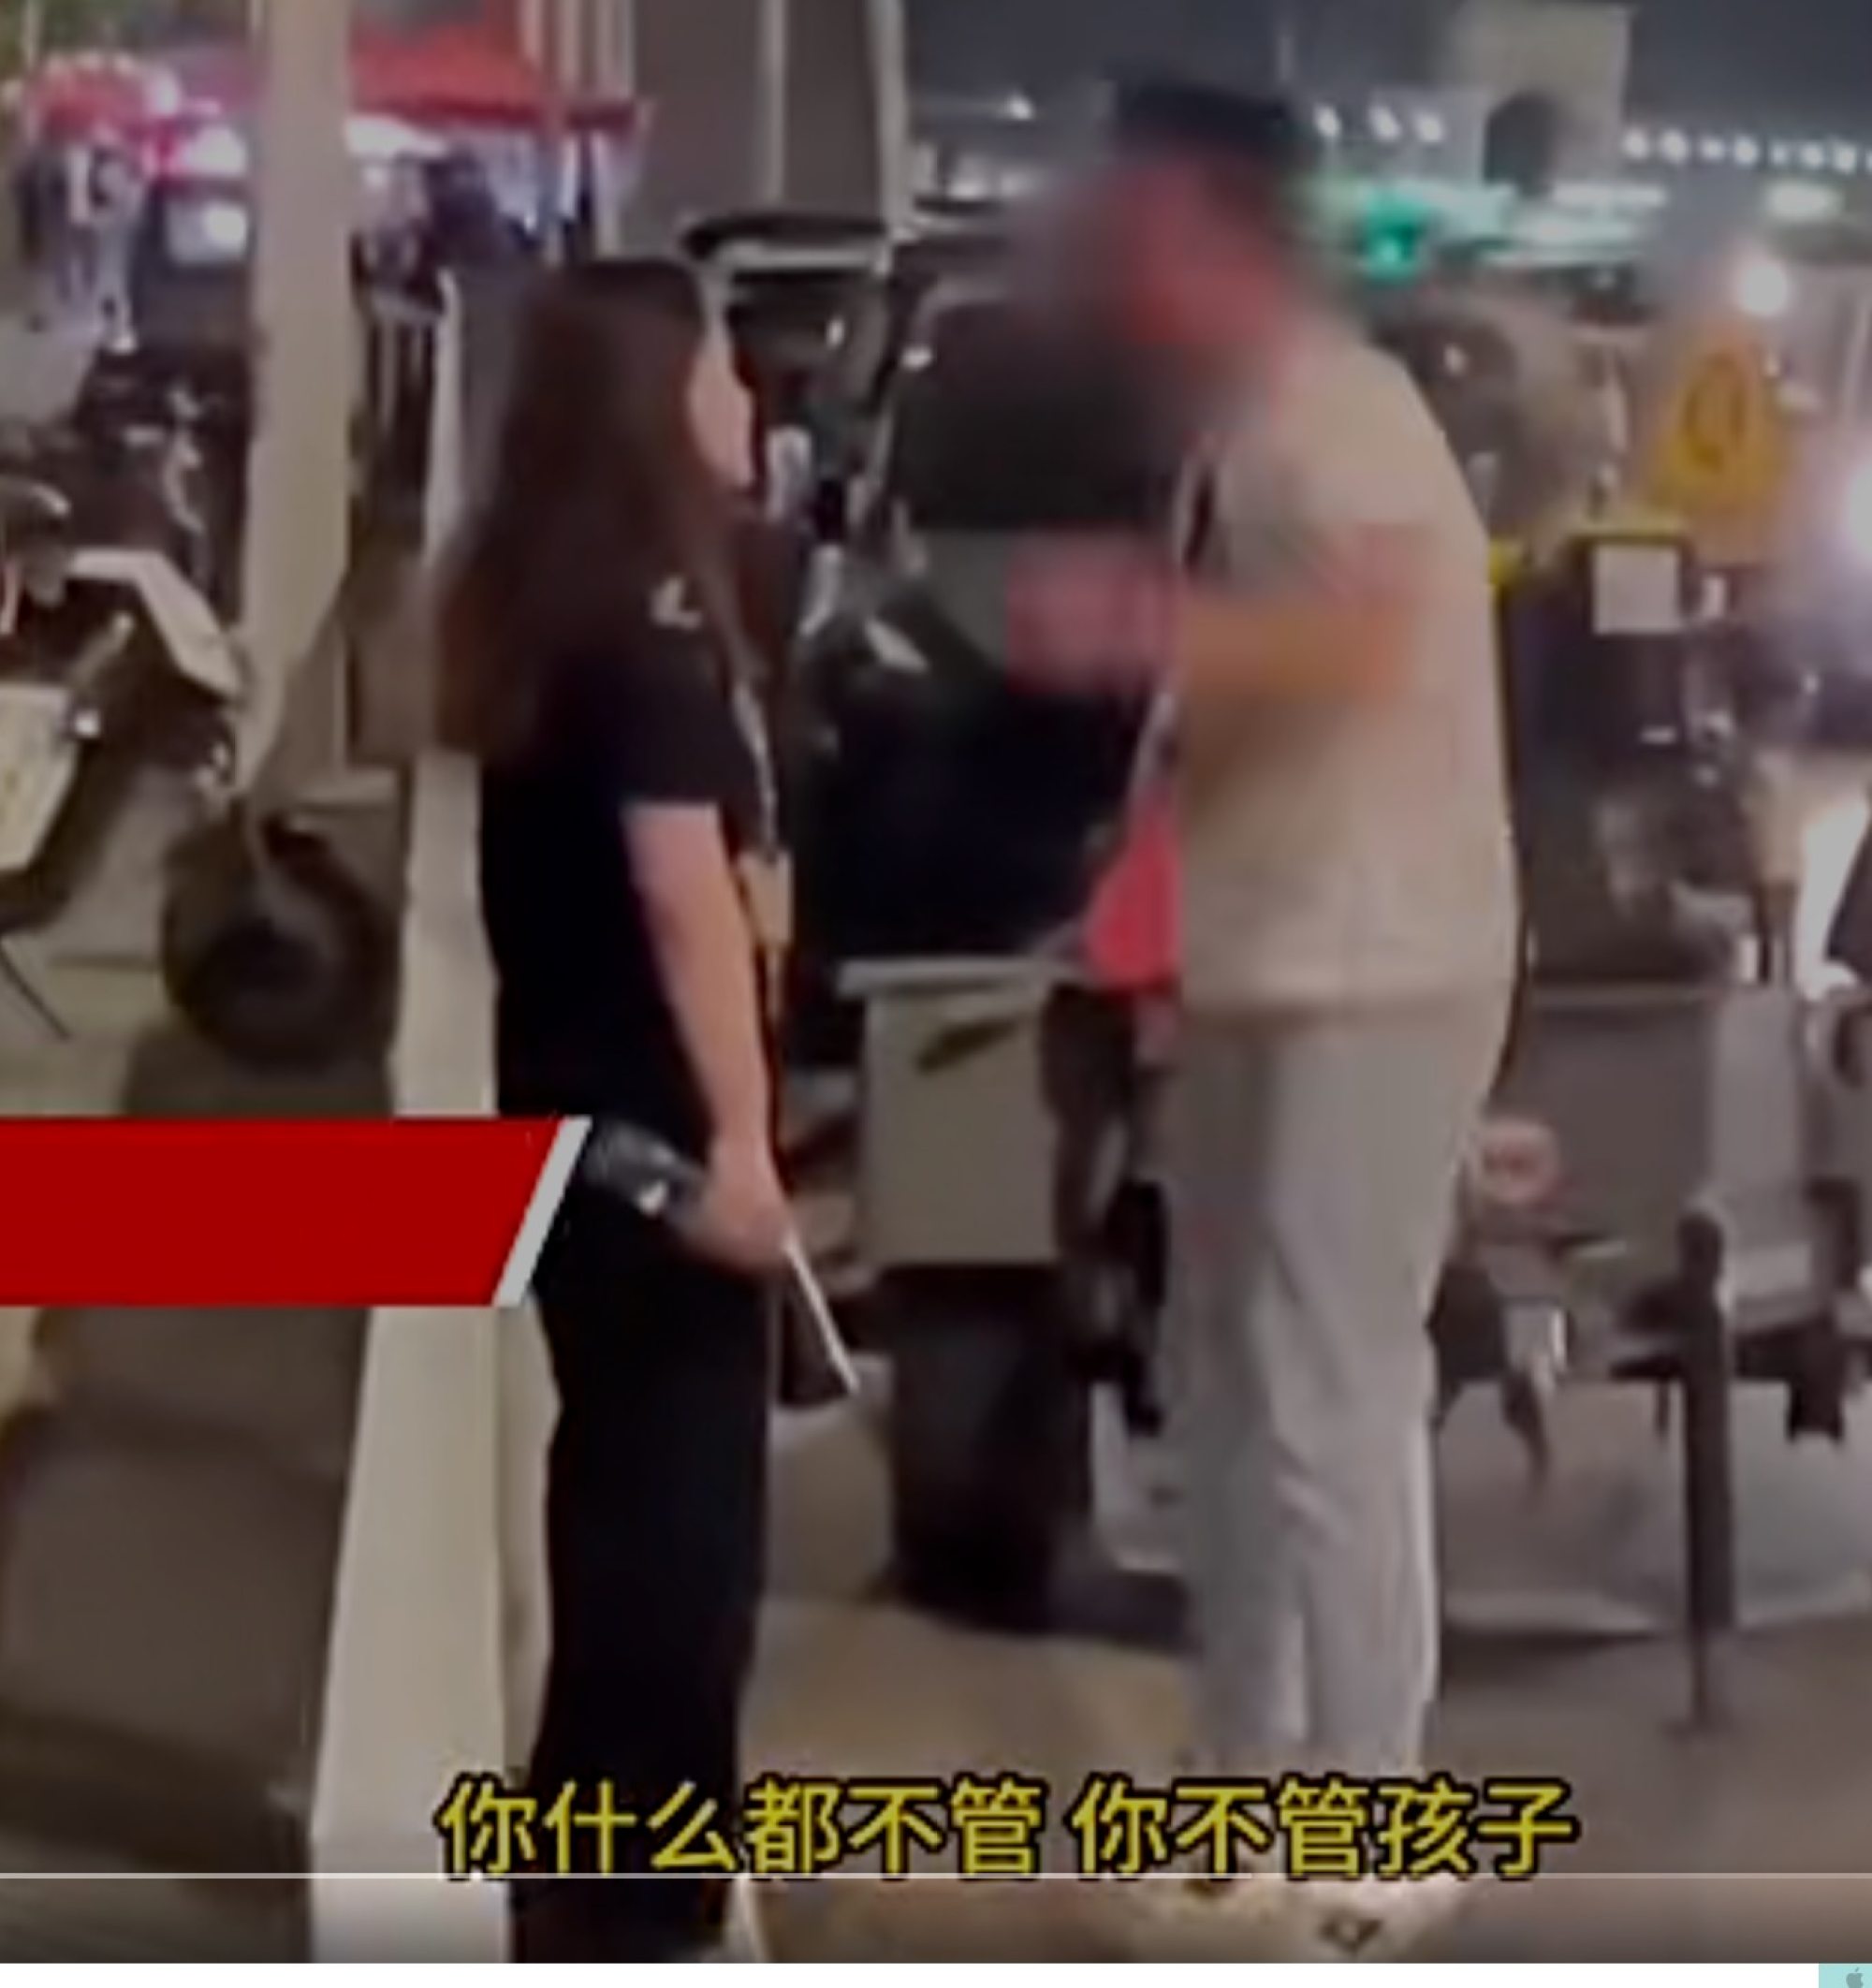 Video shows the tormented husband jumping up and down and yelling at his wife in the street. Photo: Baidu